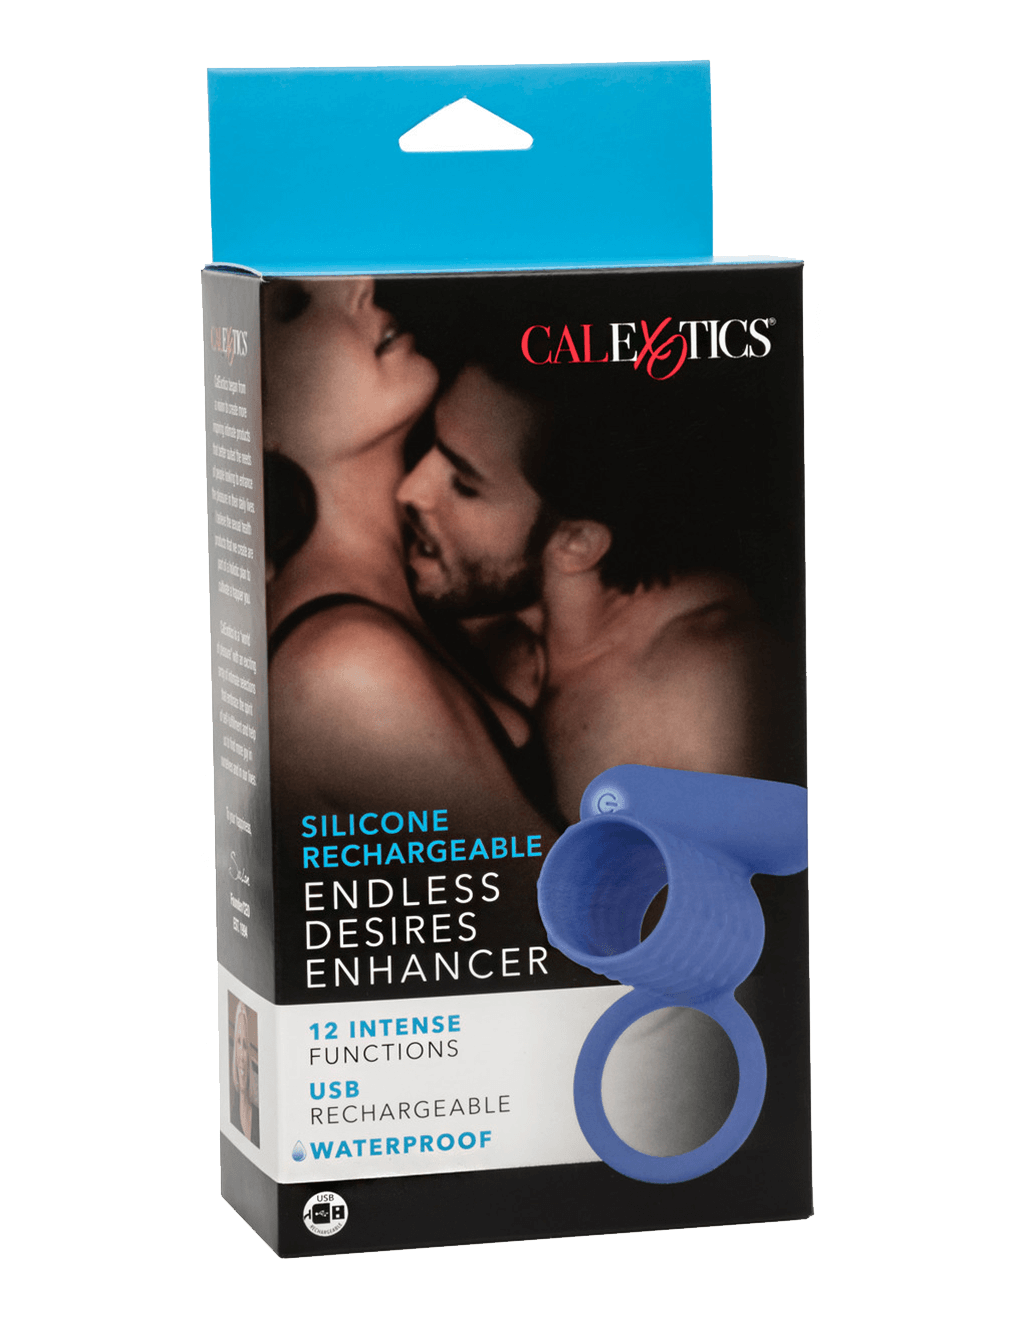 Silicone Rechargeable Endless Desires Enhancer - Blue - Box - Front